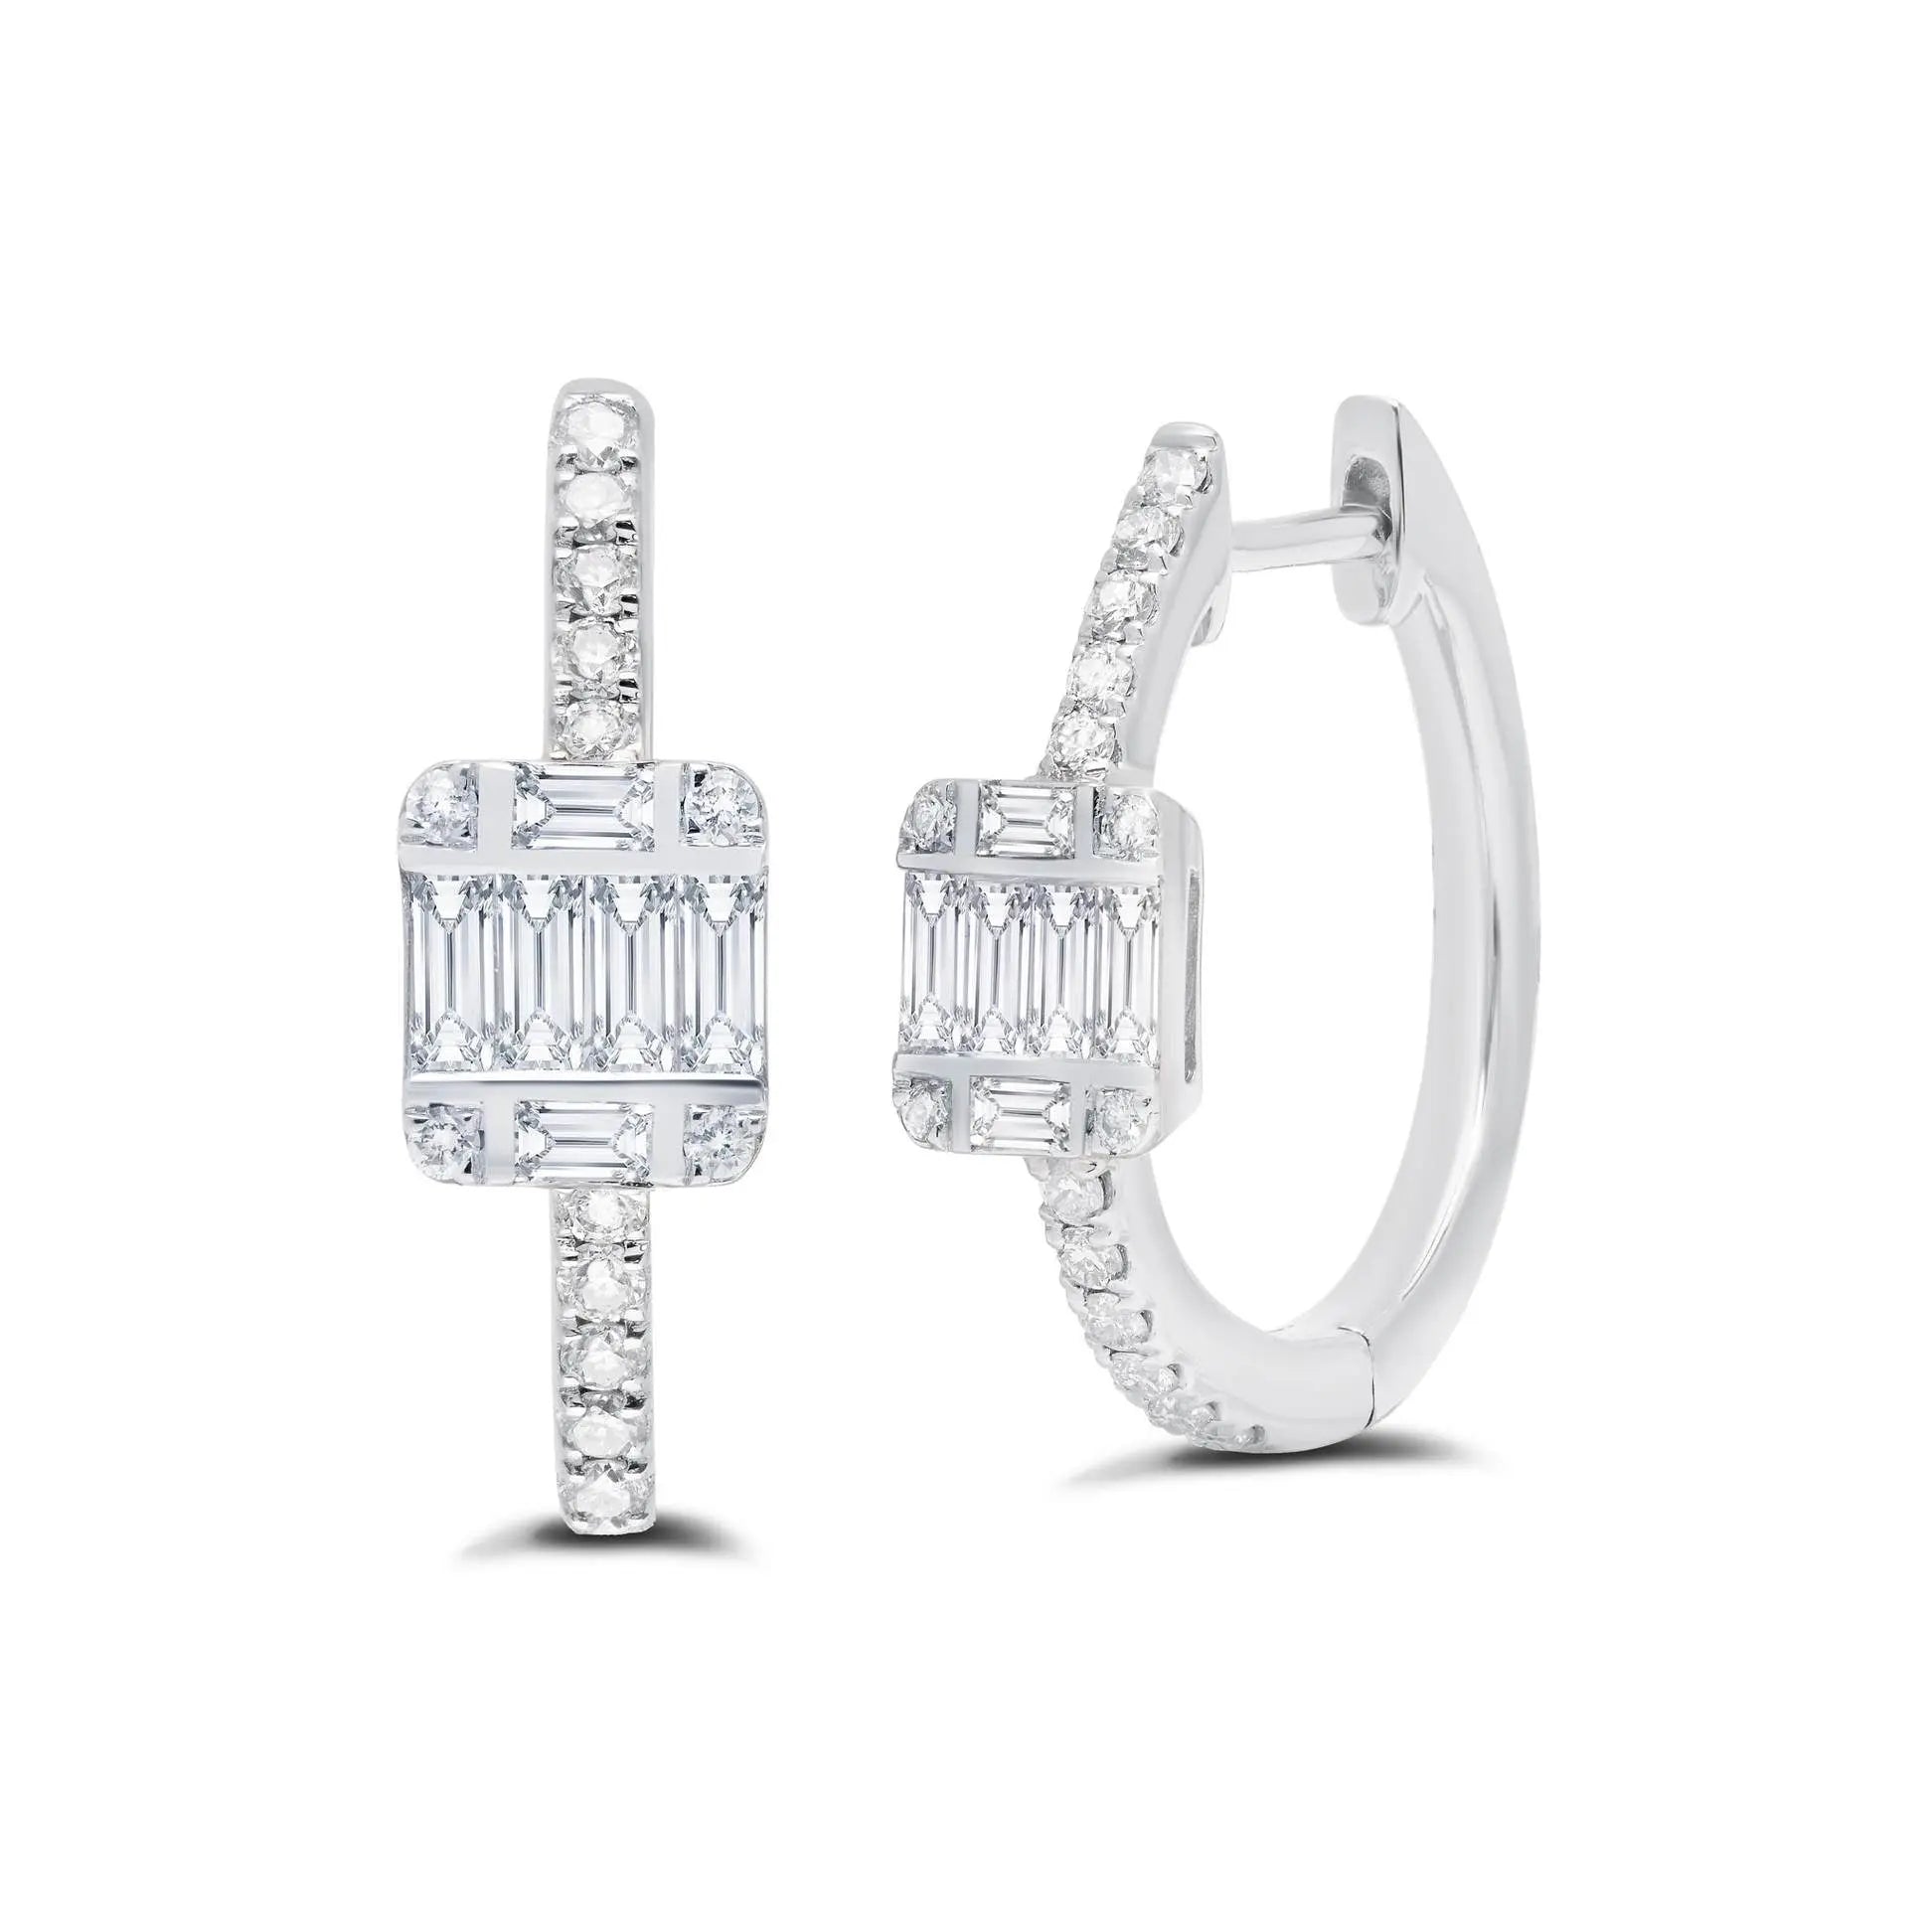 White Ascension Huggie Diamond Earrings  Details:  .39 Carats of G-H Color  Post & Latch Back If an item is out of stock, please allow 4-6 weeks for delivery